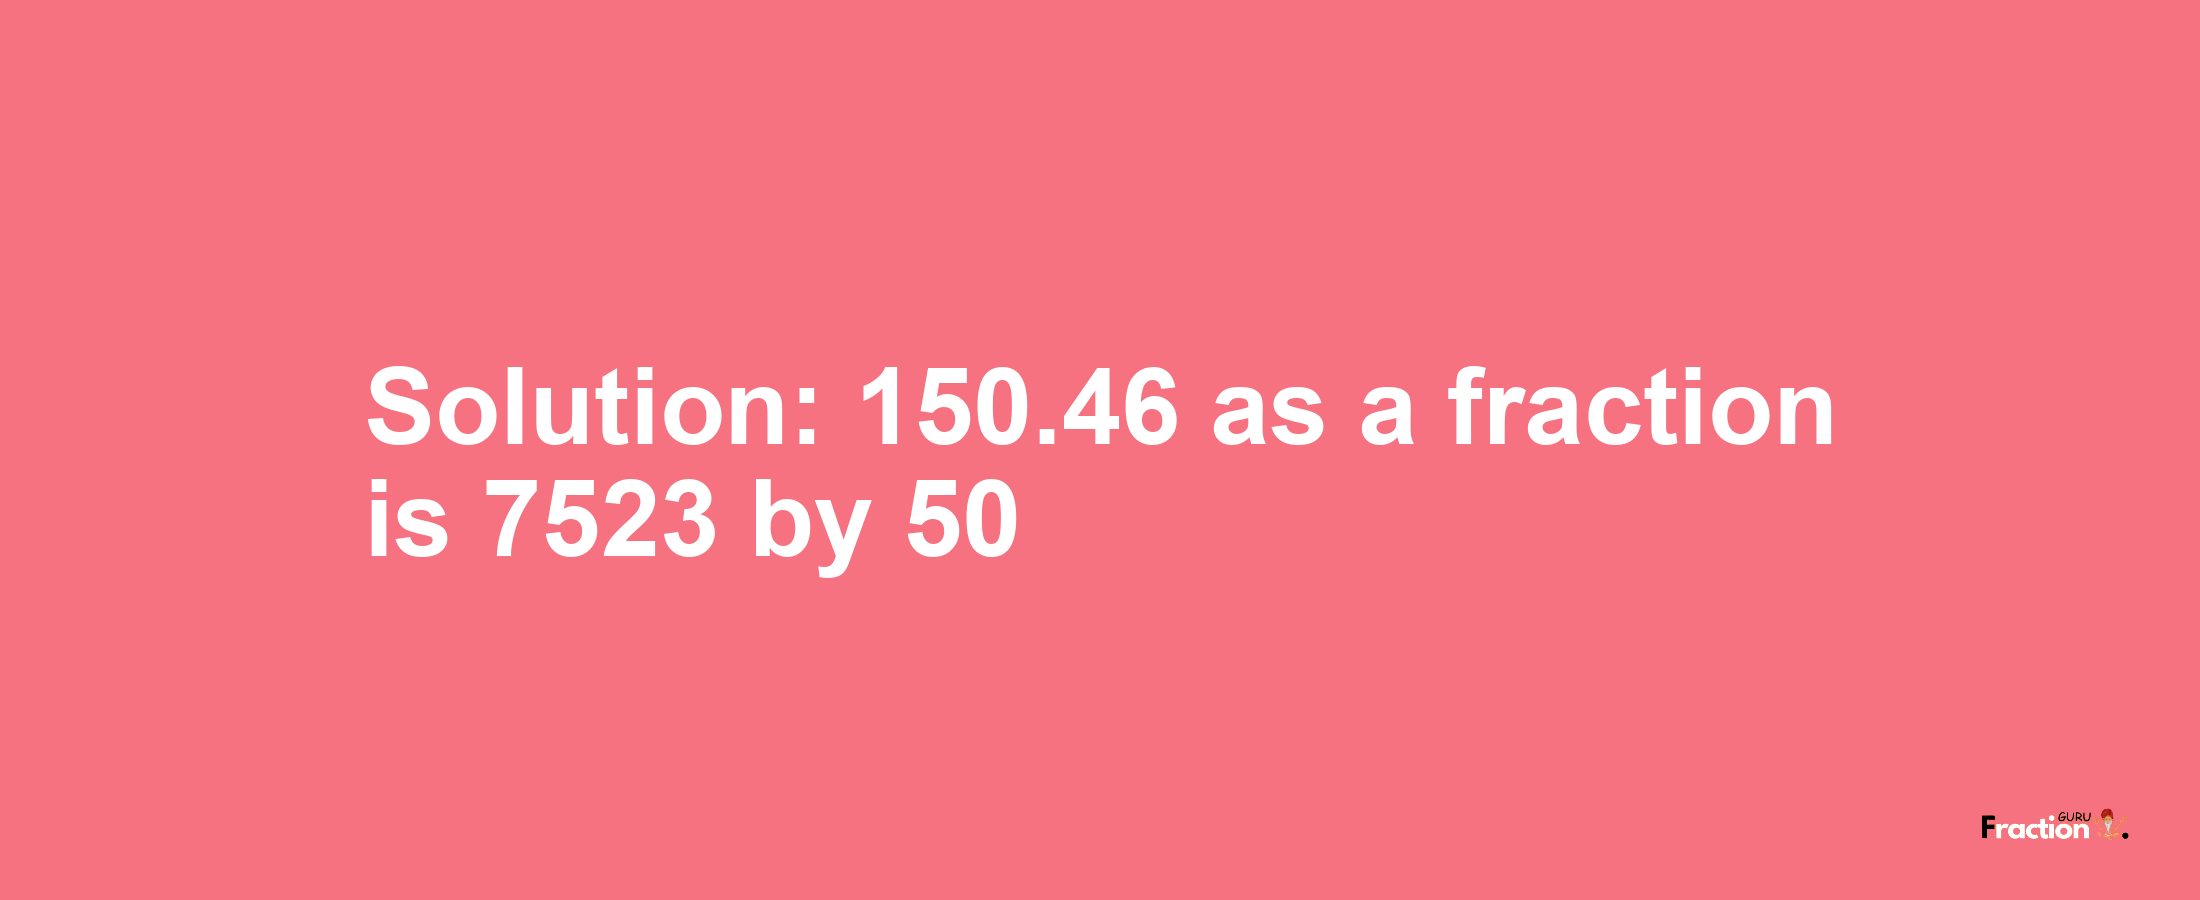 Solution:150.46 as a fraction is 7523/50